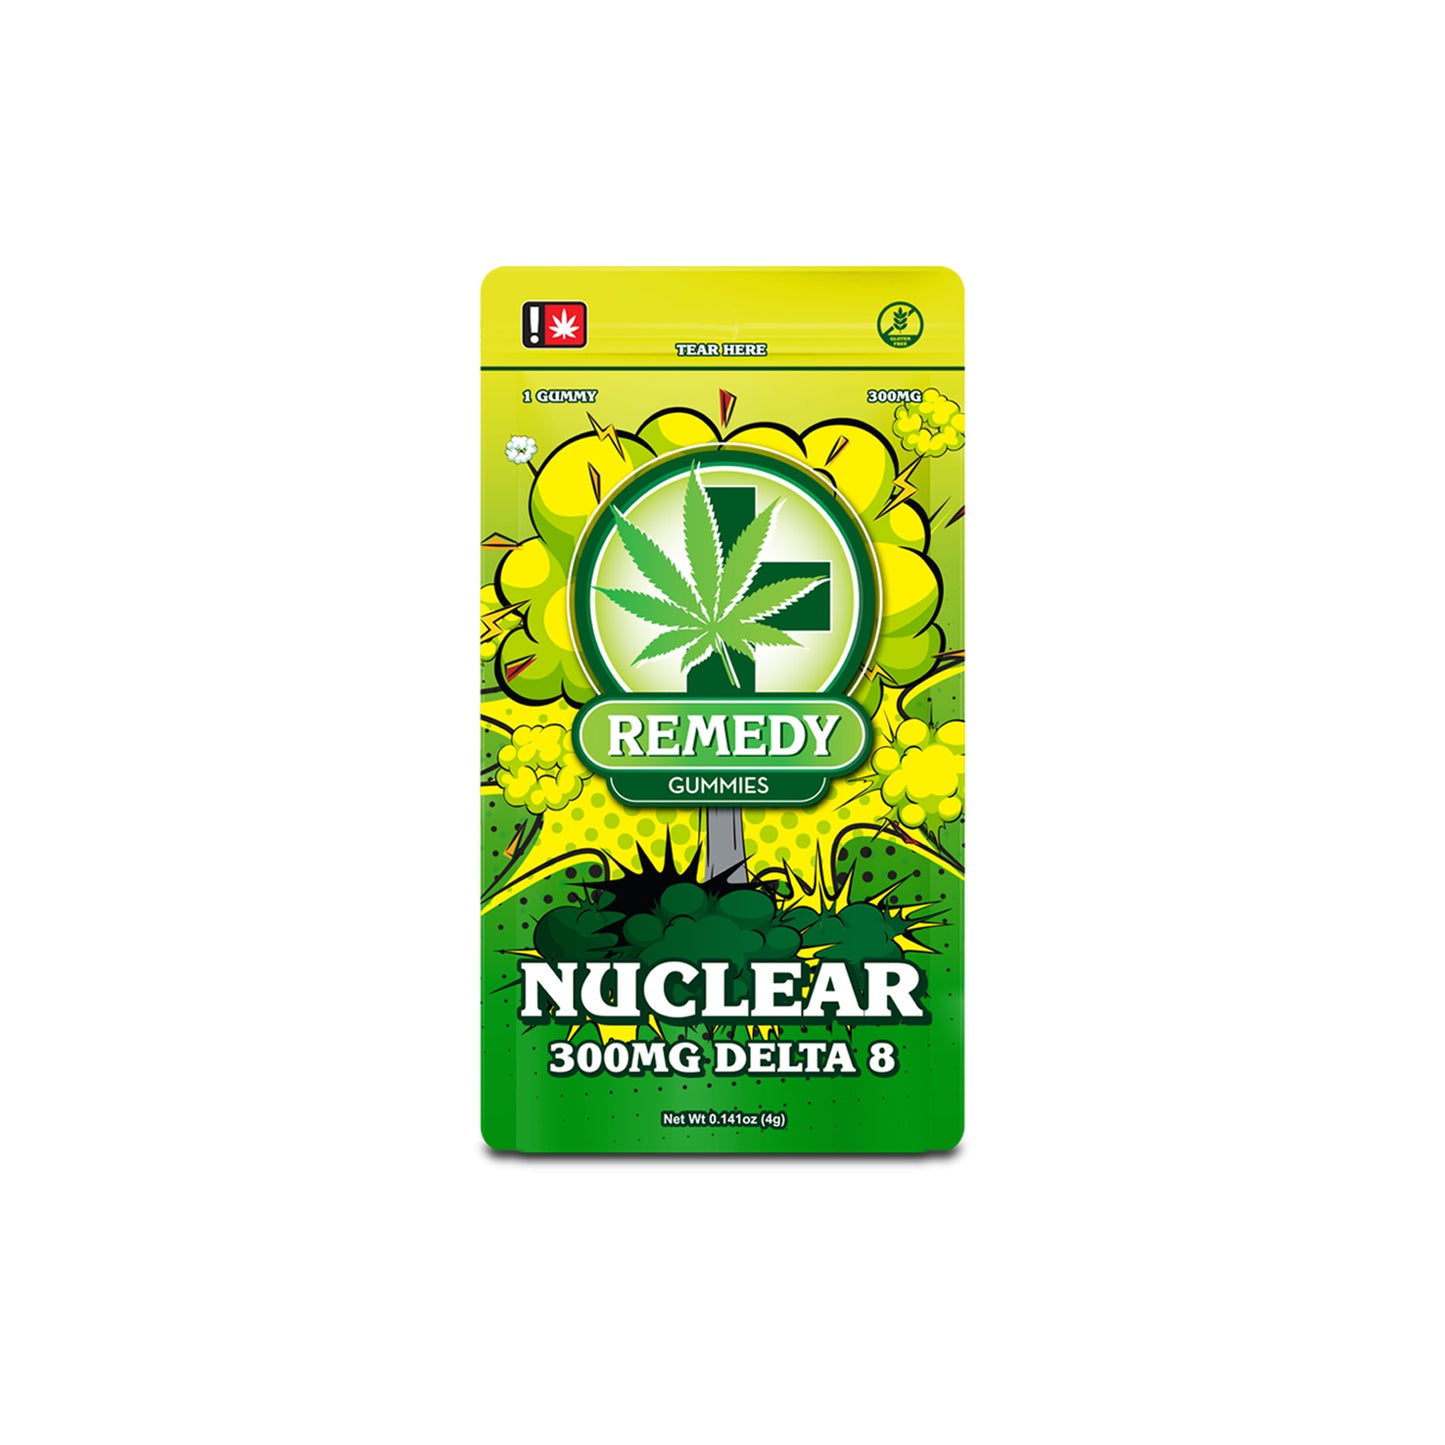 5 Pack Nuclear Gummies 300mg/1ct - Delta 8